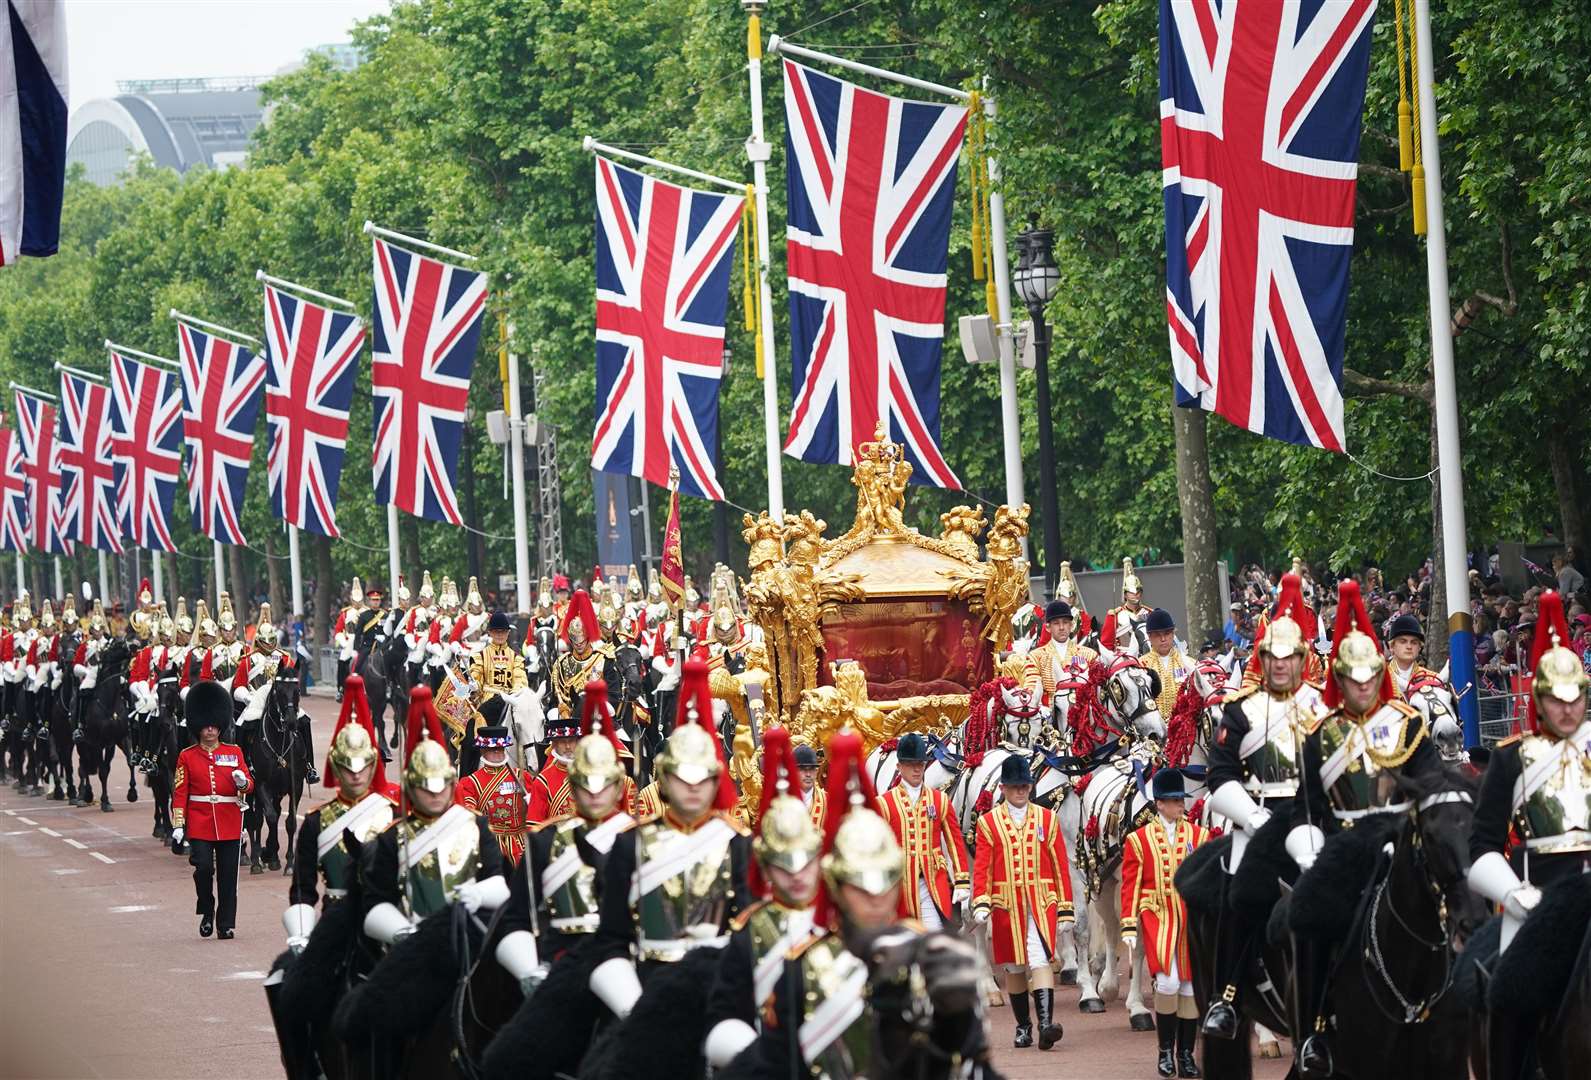 Celebrations will feature a military spectacle on the streets of London (Yui Mok/PA)